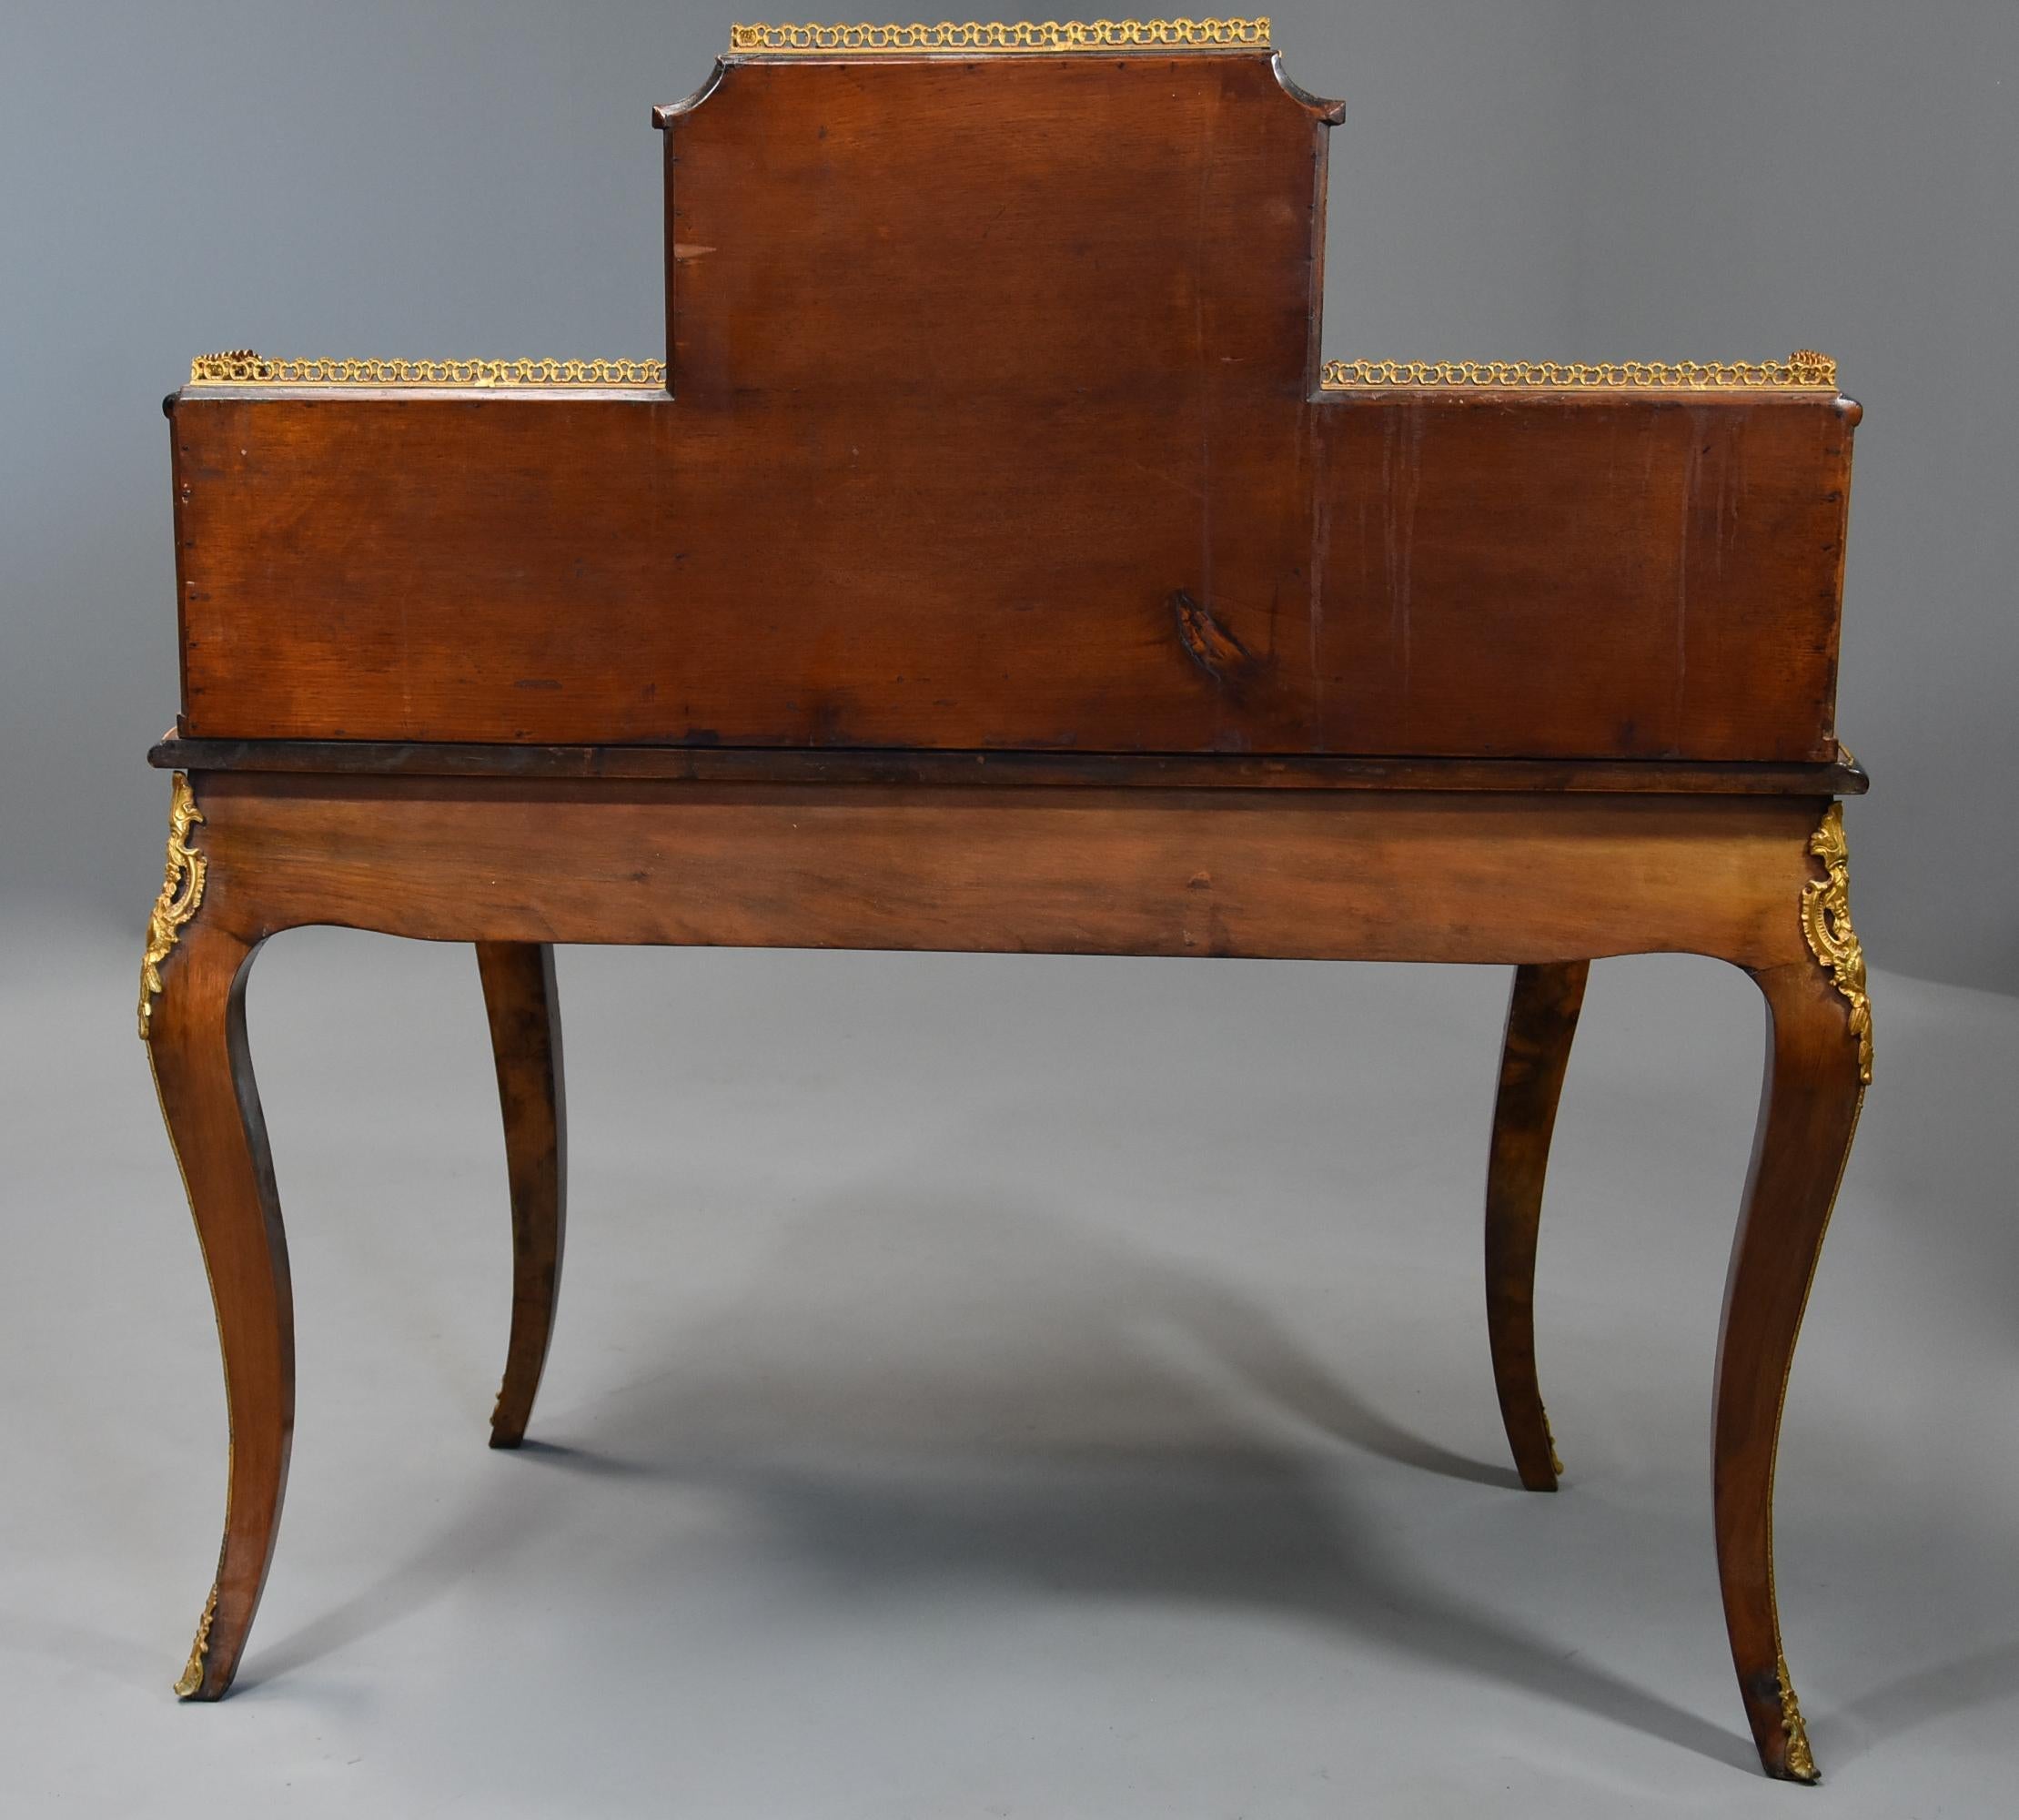 Mid-19th Century Fine Quality Burr Walnut Bonheur de Jour in the French Style For Sale 8